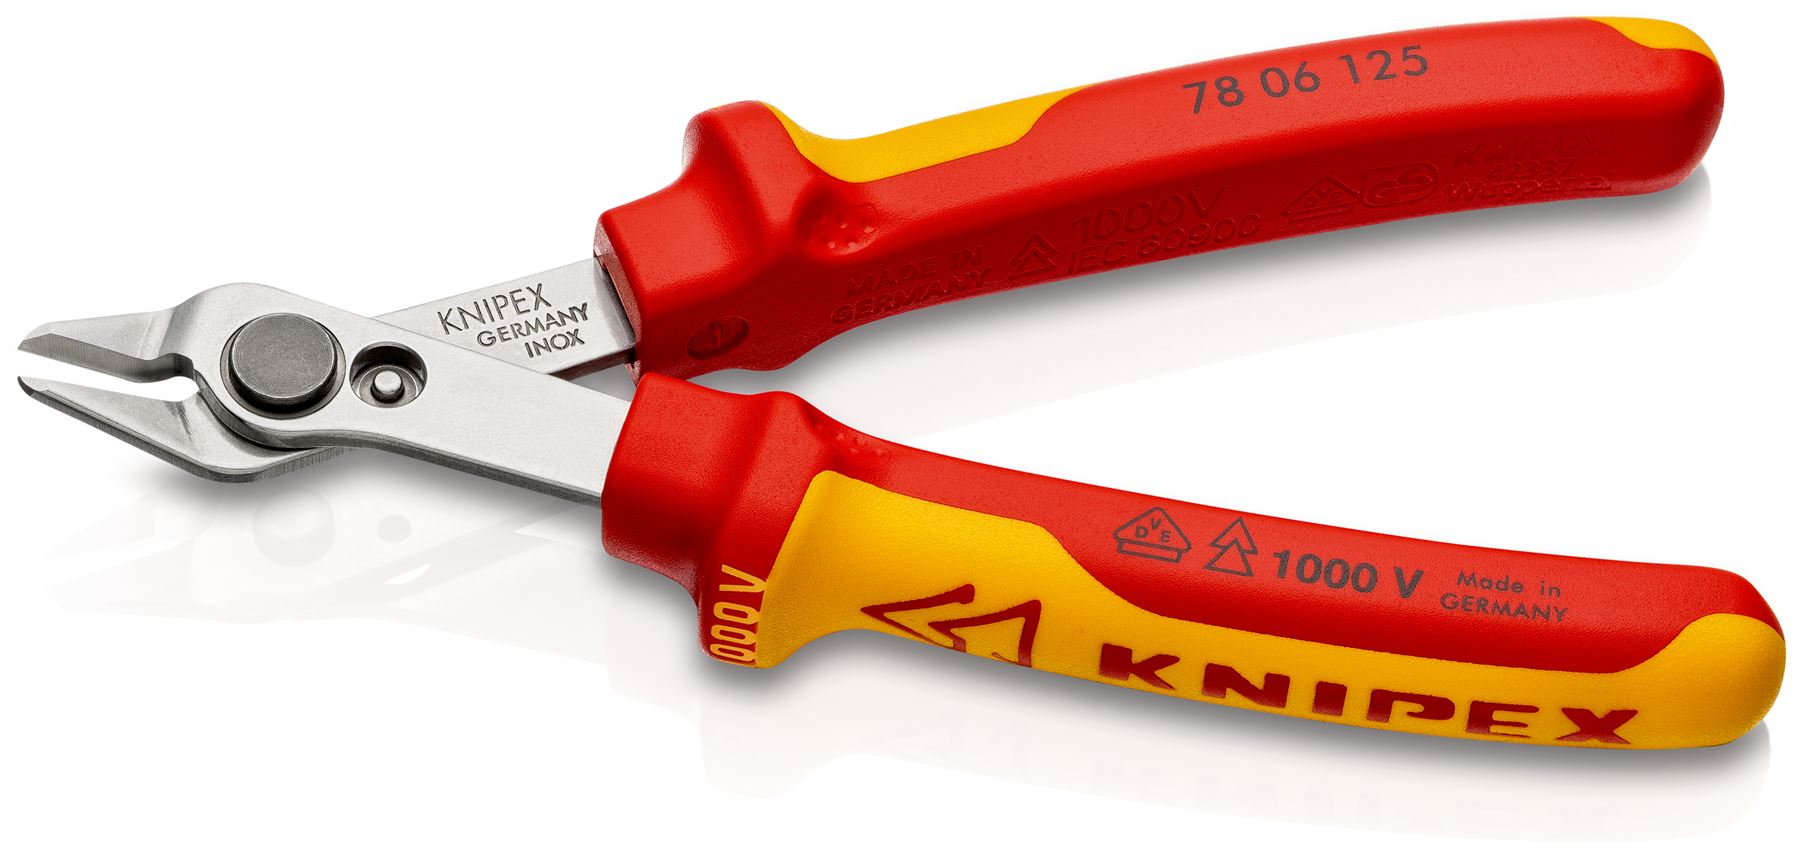 Knipex Electronic Super Knips® 125mm VDE Insulated Fine Wire Cutting Pliers 78 06 125